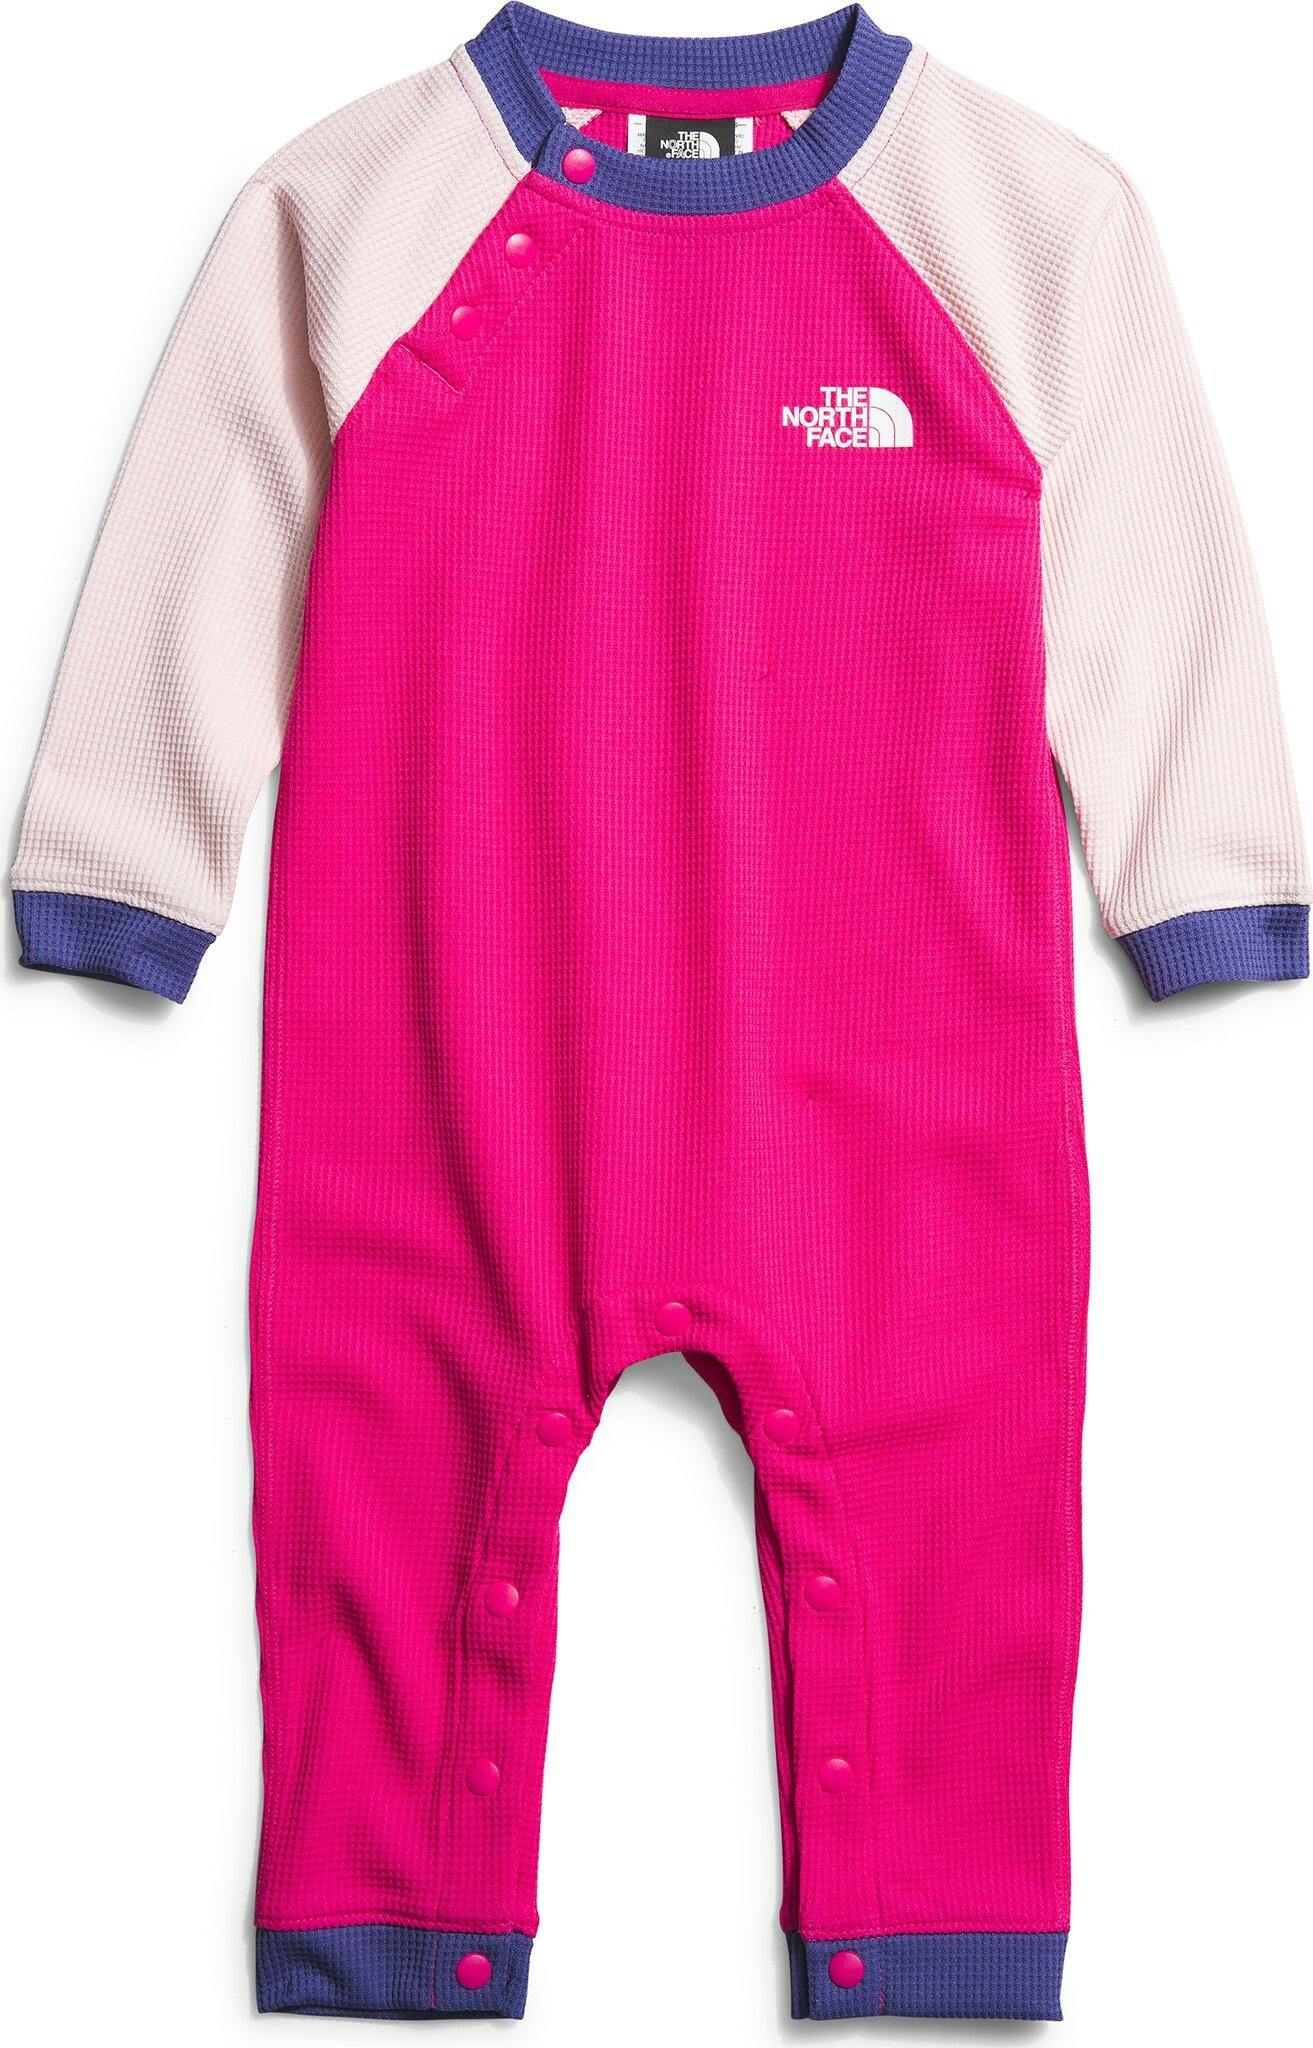 Product image for Waffle One Piece Base Layer - Baby